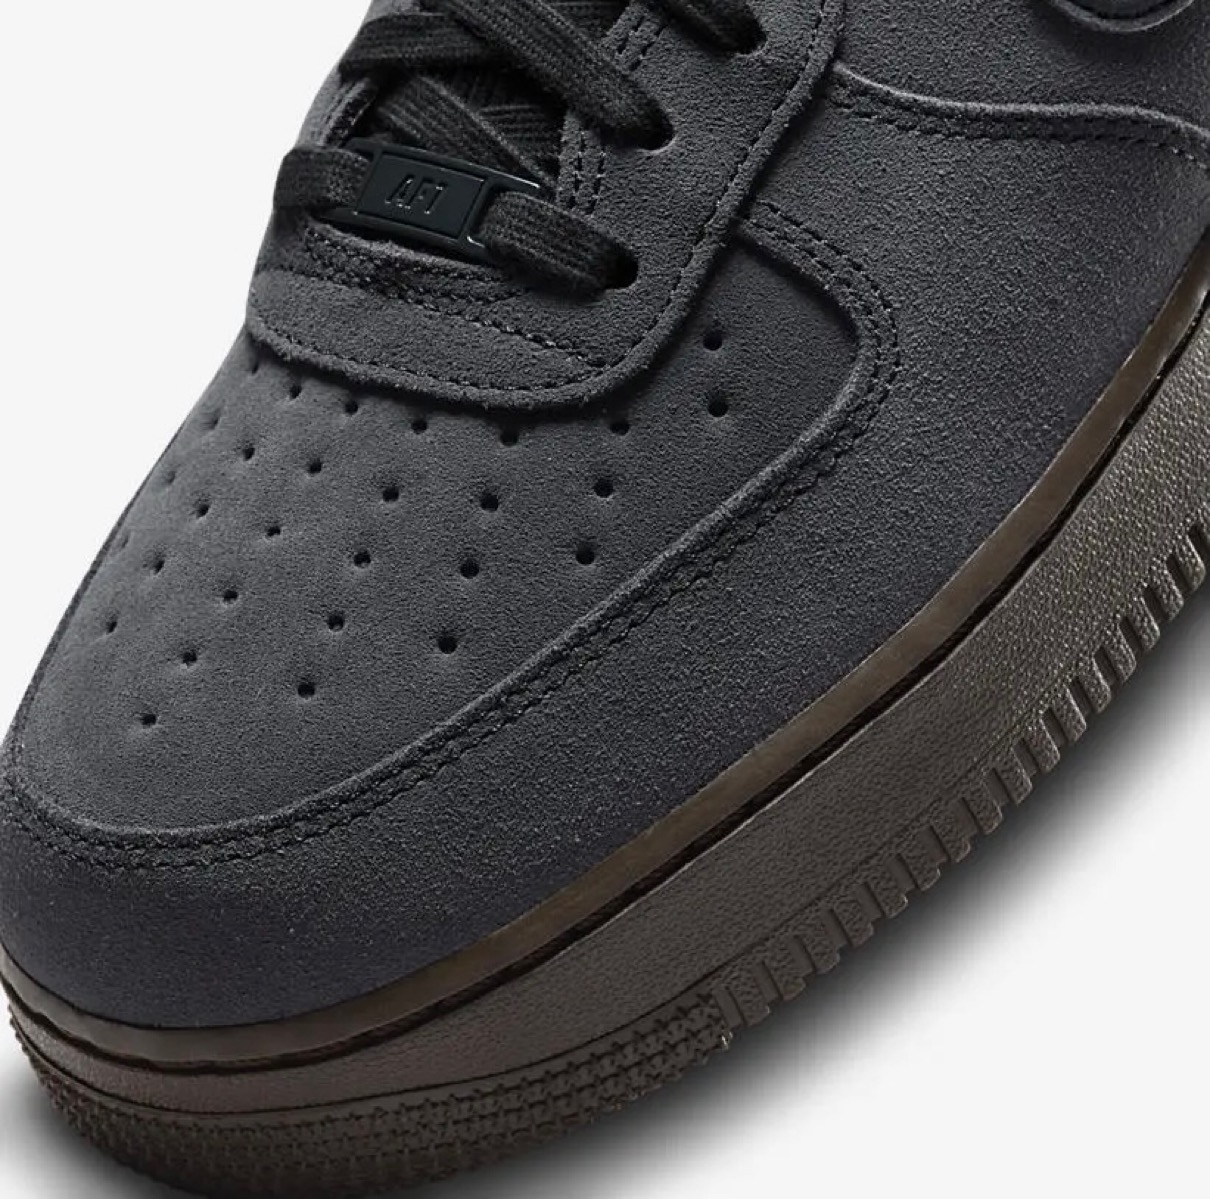 Nike】Air Force 1 Low Suede Pack “Off Noir” & “Summit White”が2021 